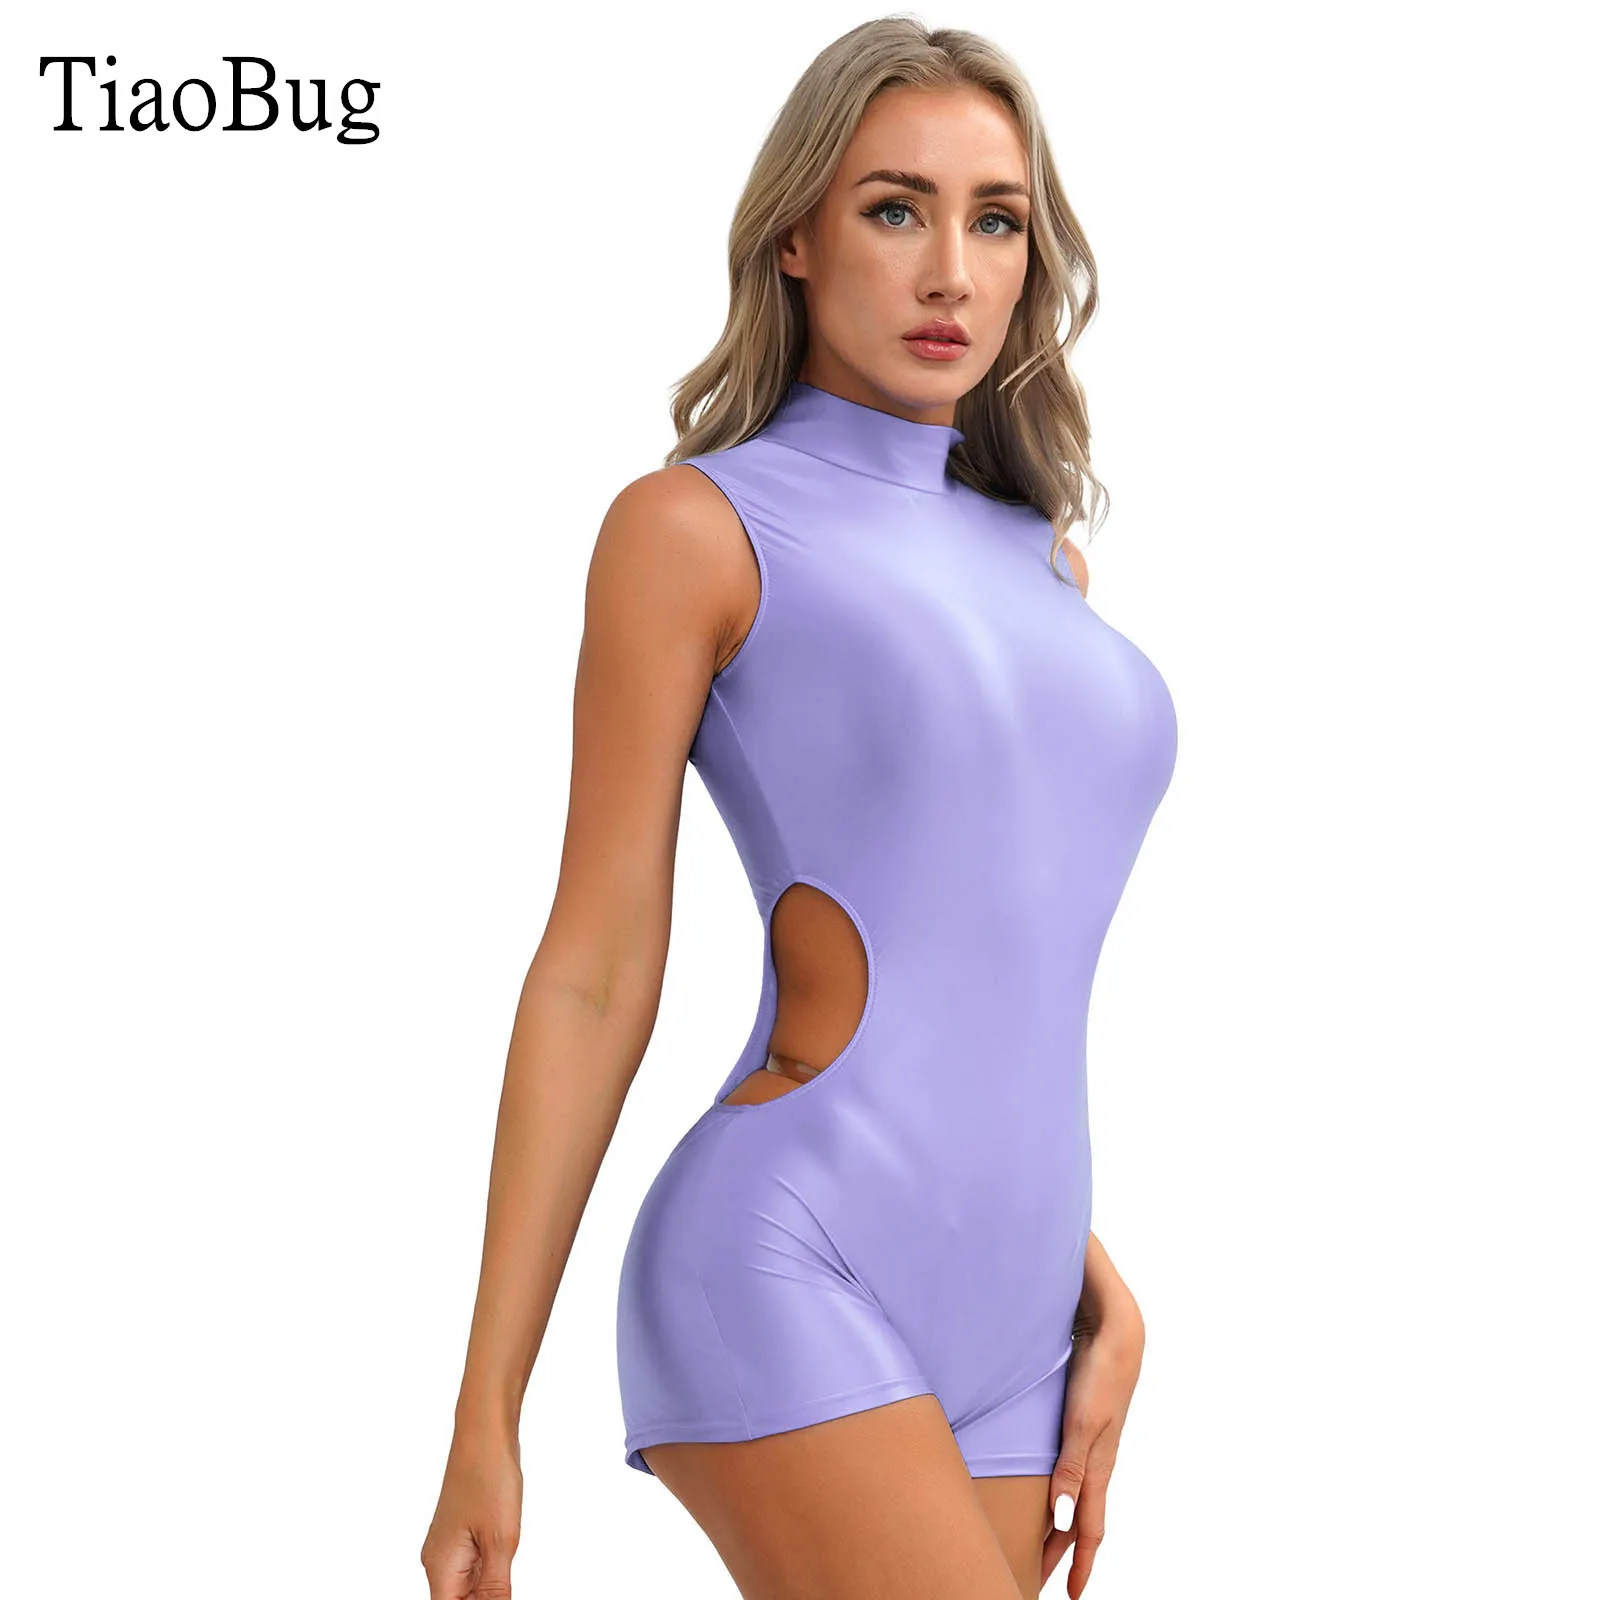 Women Stretchy Glossy Sleeveless Bodysuit Mock Neck Side Cutout Back Zipper Tight Short Swimsuit for Fitness Exercise Workout white stitching stand neck zipper jacket mma combat thai boxing training martial arts jujitsu fitness fishing cycling suit